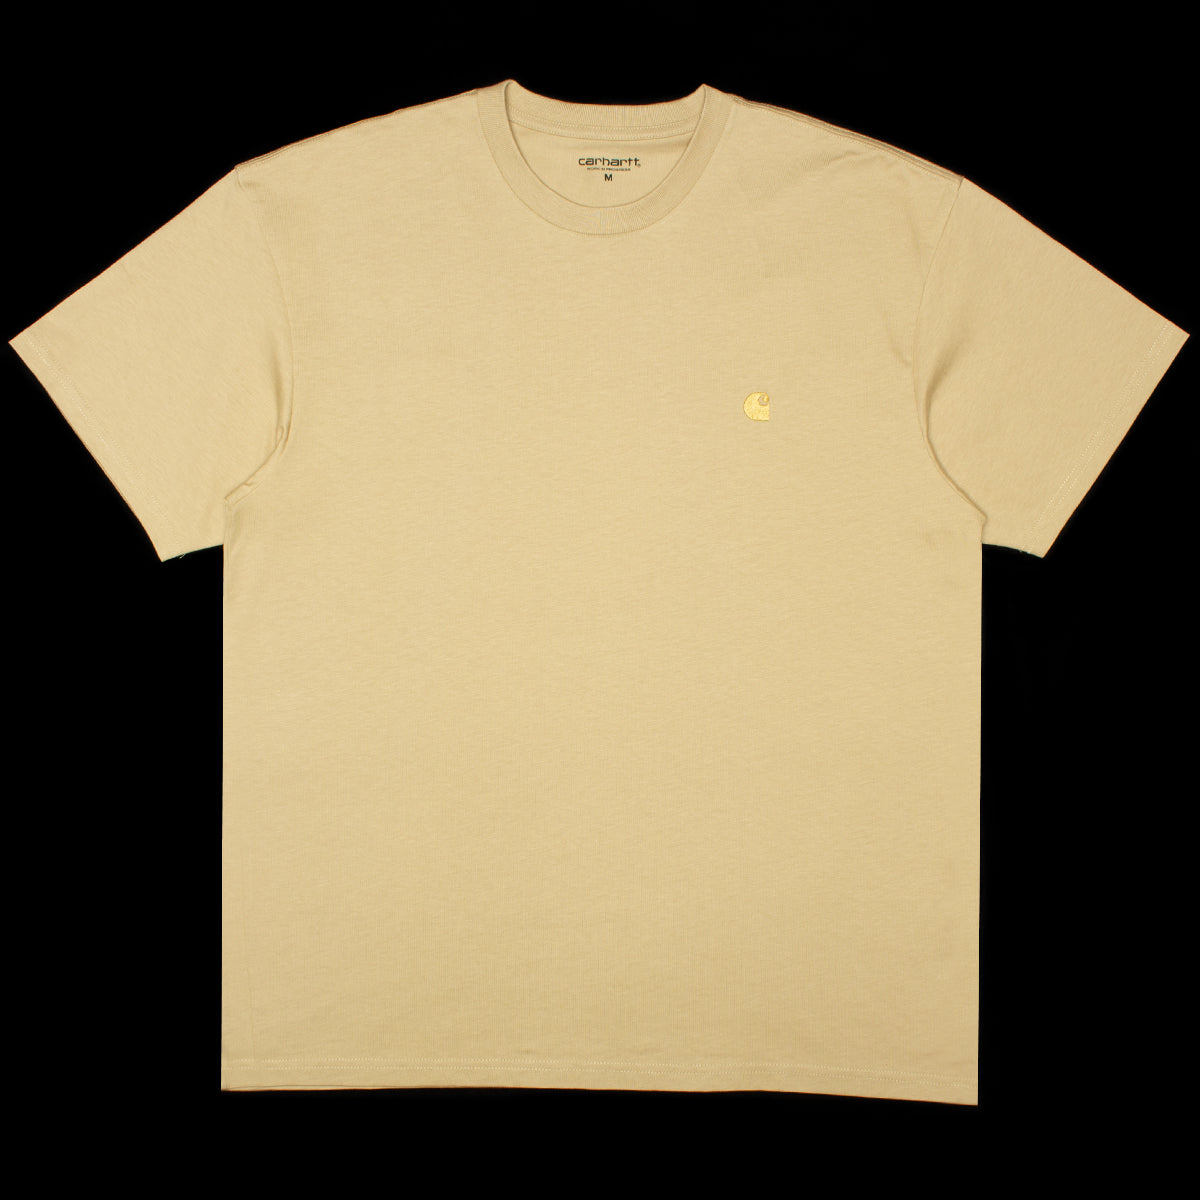 Carhartt WIP | S/S Chase T-Shirt Style # I026391-22I Color : Sable / Gold